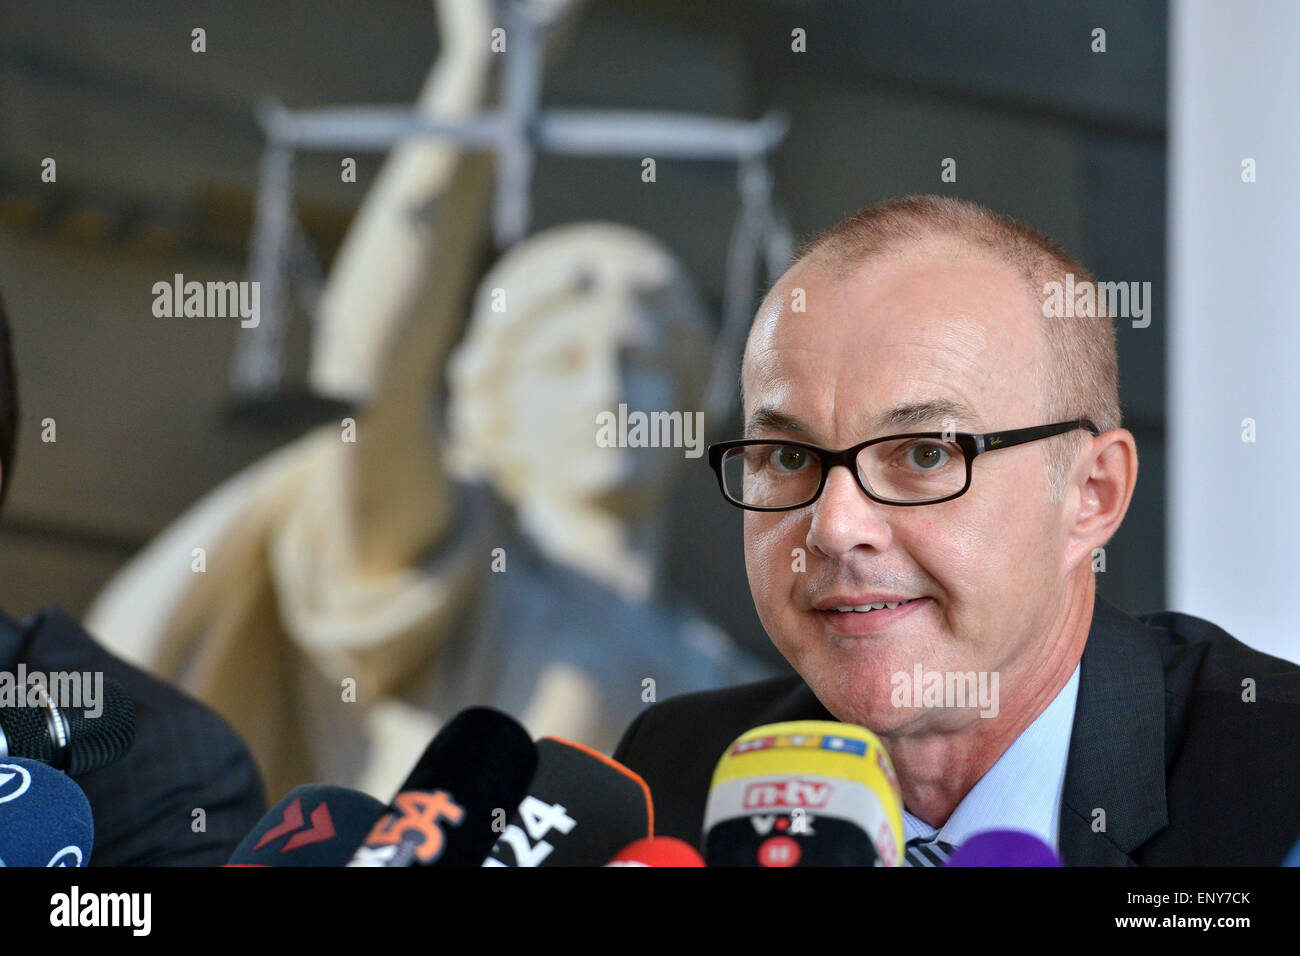 Trier, Germany. 12th May, 2015. Senior public prosecutor Peter Fritzen (R), along with public prosecutor Eric Samel (L), speaks during a press conference on the mortal remains of Tanja Graeff found yesterday and the current status of the investigations in Trier, Germany, 12 May 2015. Nearly the whole skeleton of Graeff has been found, said Fritzen, as well as jewellery, clothing, a mobile phone and a student identity card. 'Everything indicates that it is indeed Tanja Graeff, ' he said. PHOTO: HARALD TITTEL/dpa/Alamy Live News Stock Photo